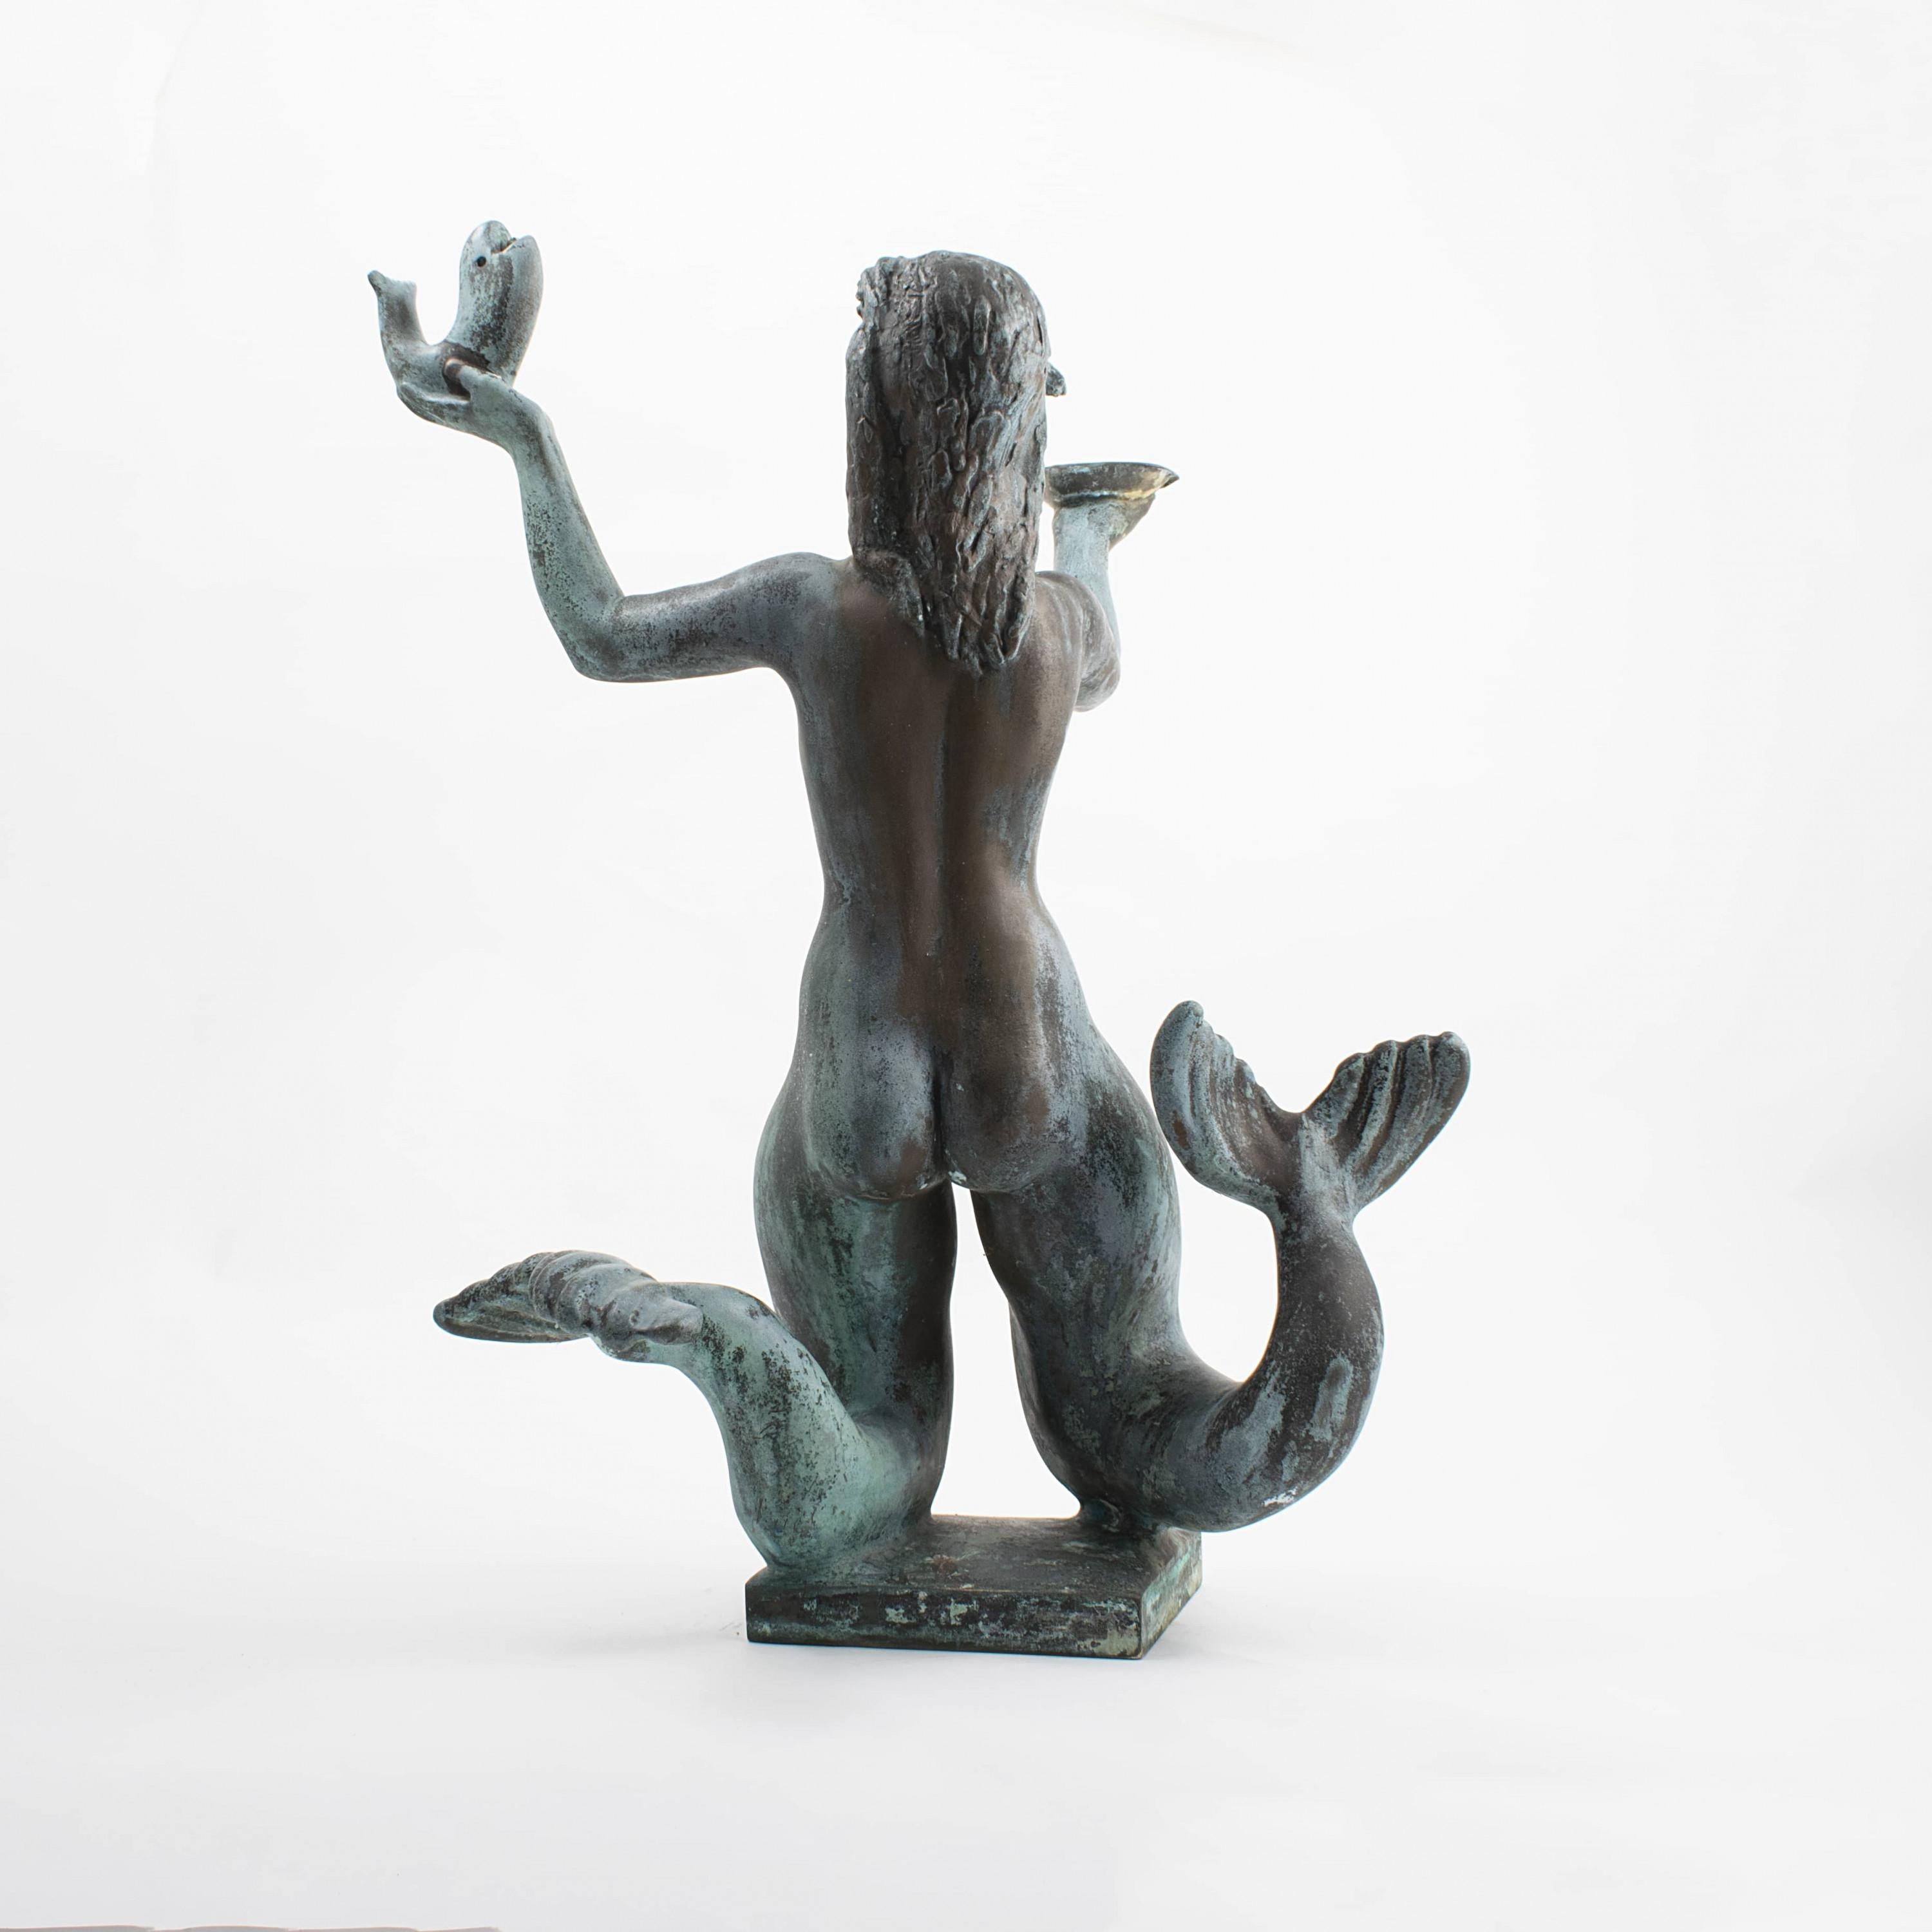 20th Century Johannes C. Bjerg, Bronze Sculpture Mermaid Fountain, Signed & Dated 1934